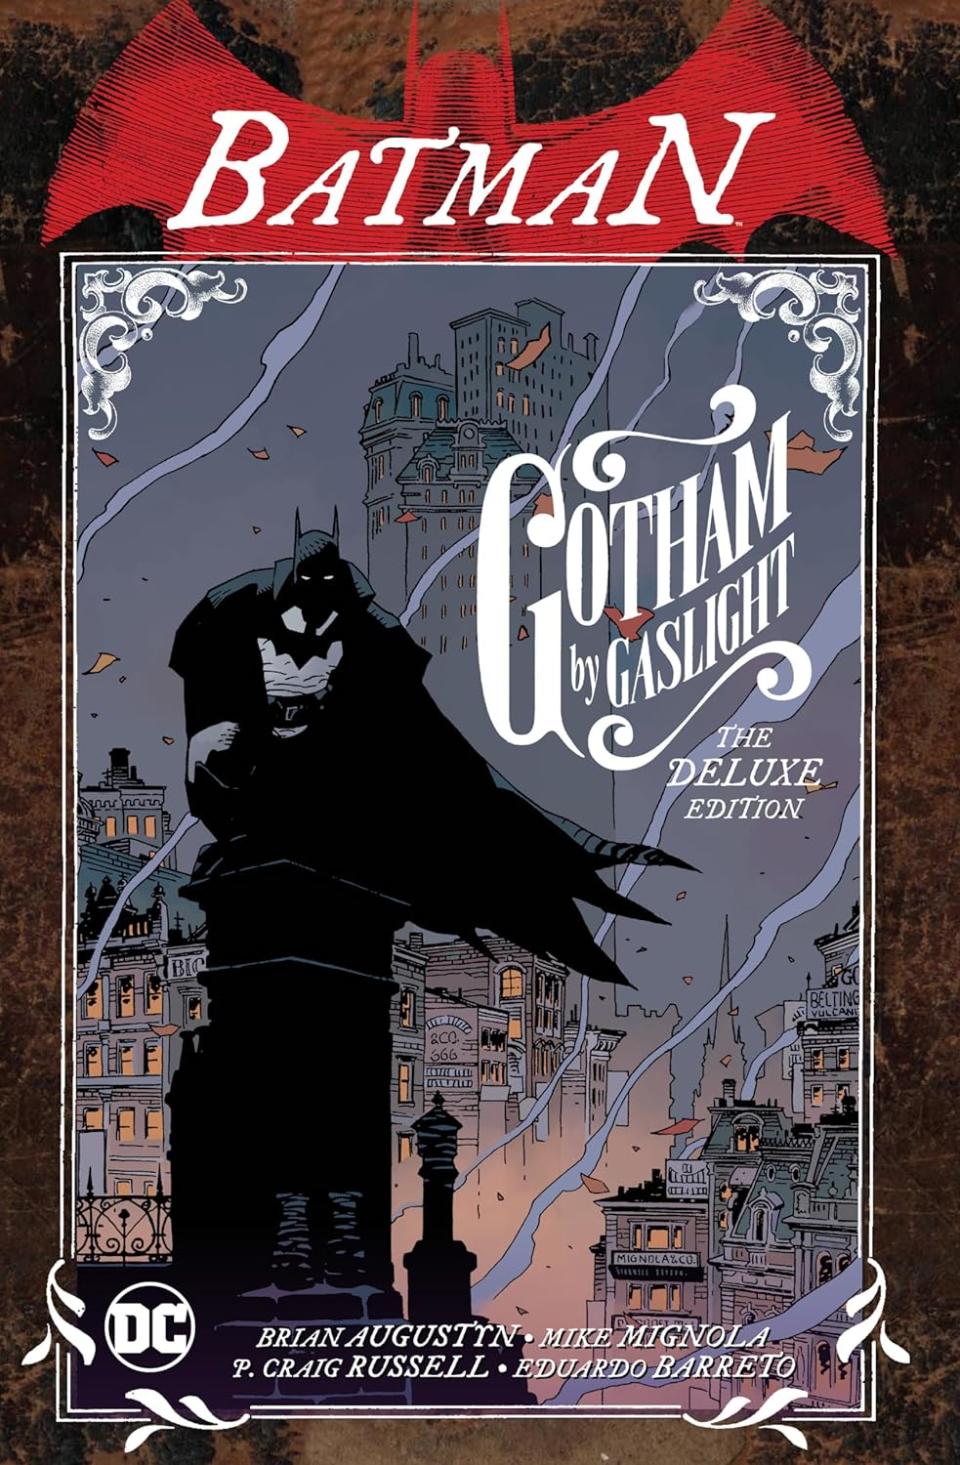 Because of course it's been done (though sans Scrooge), the 1989 "Gotham by Gaslight" graphic novel.